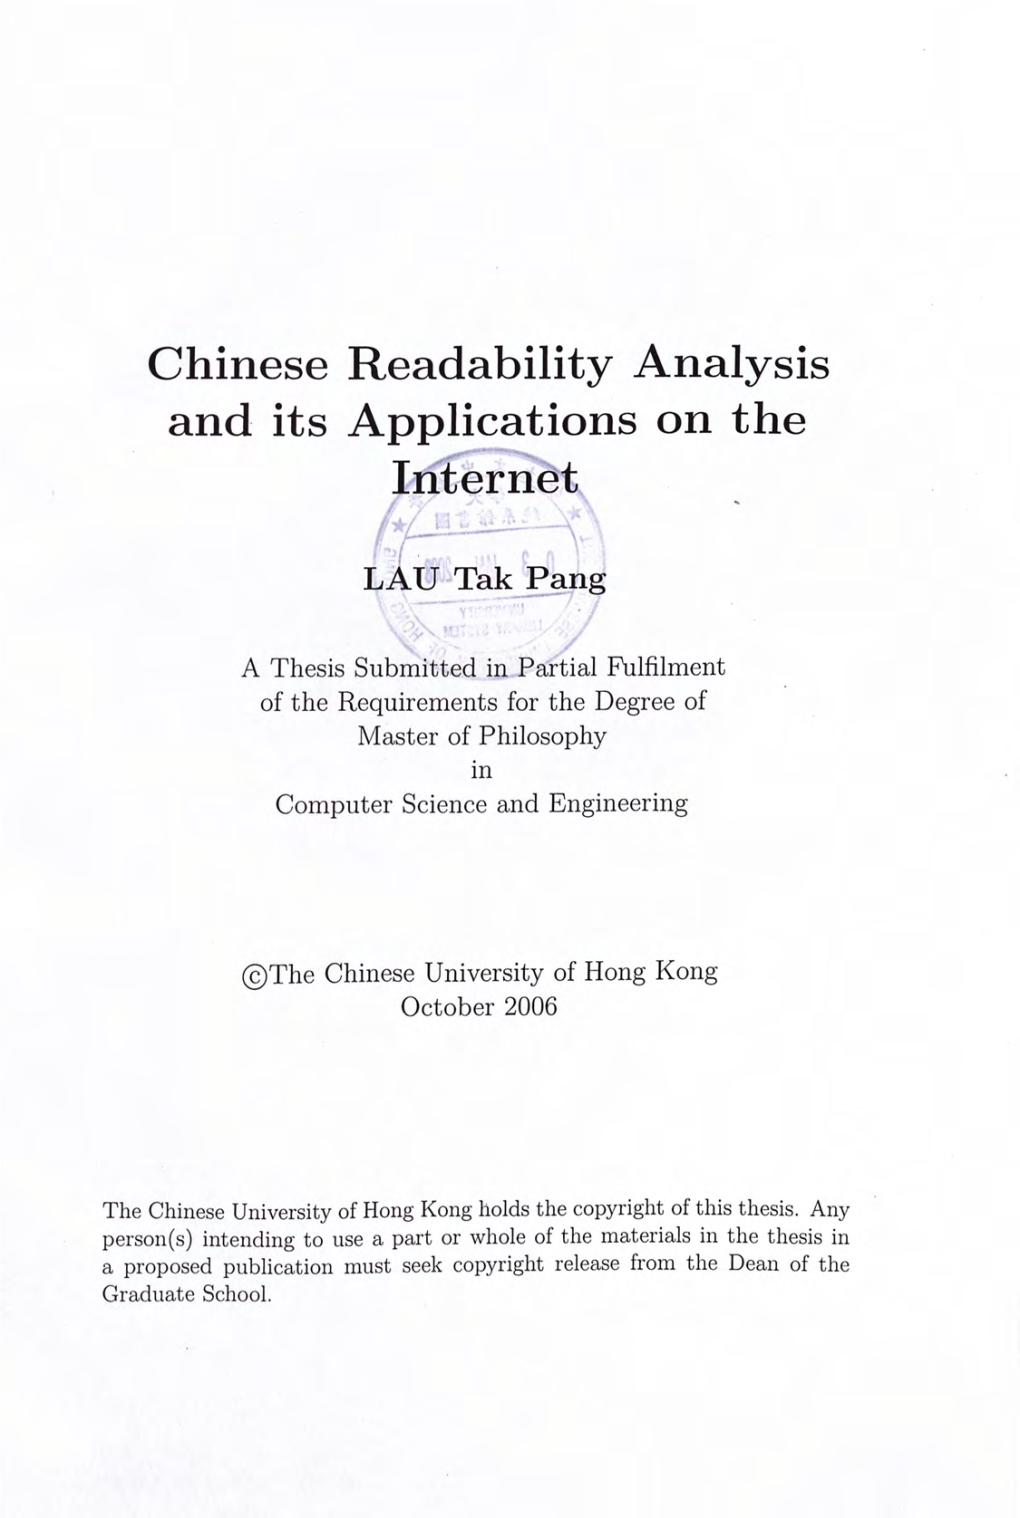 Chinese Readability Analysis and Its Applications on the Internet